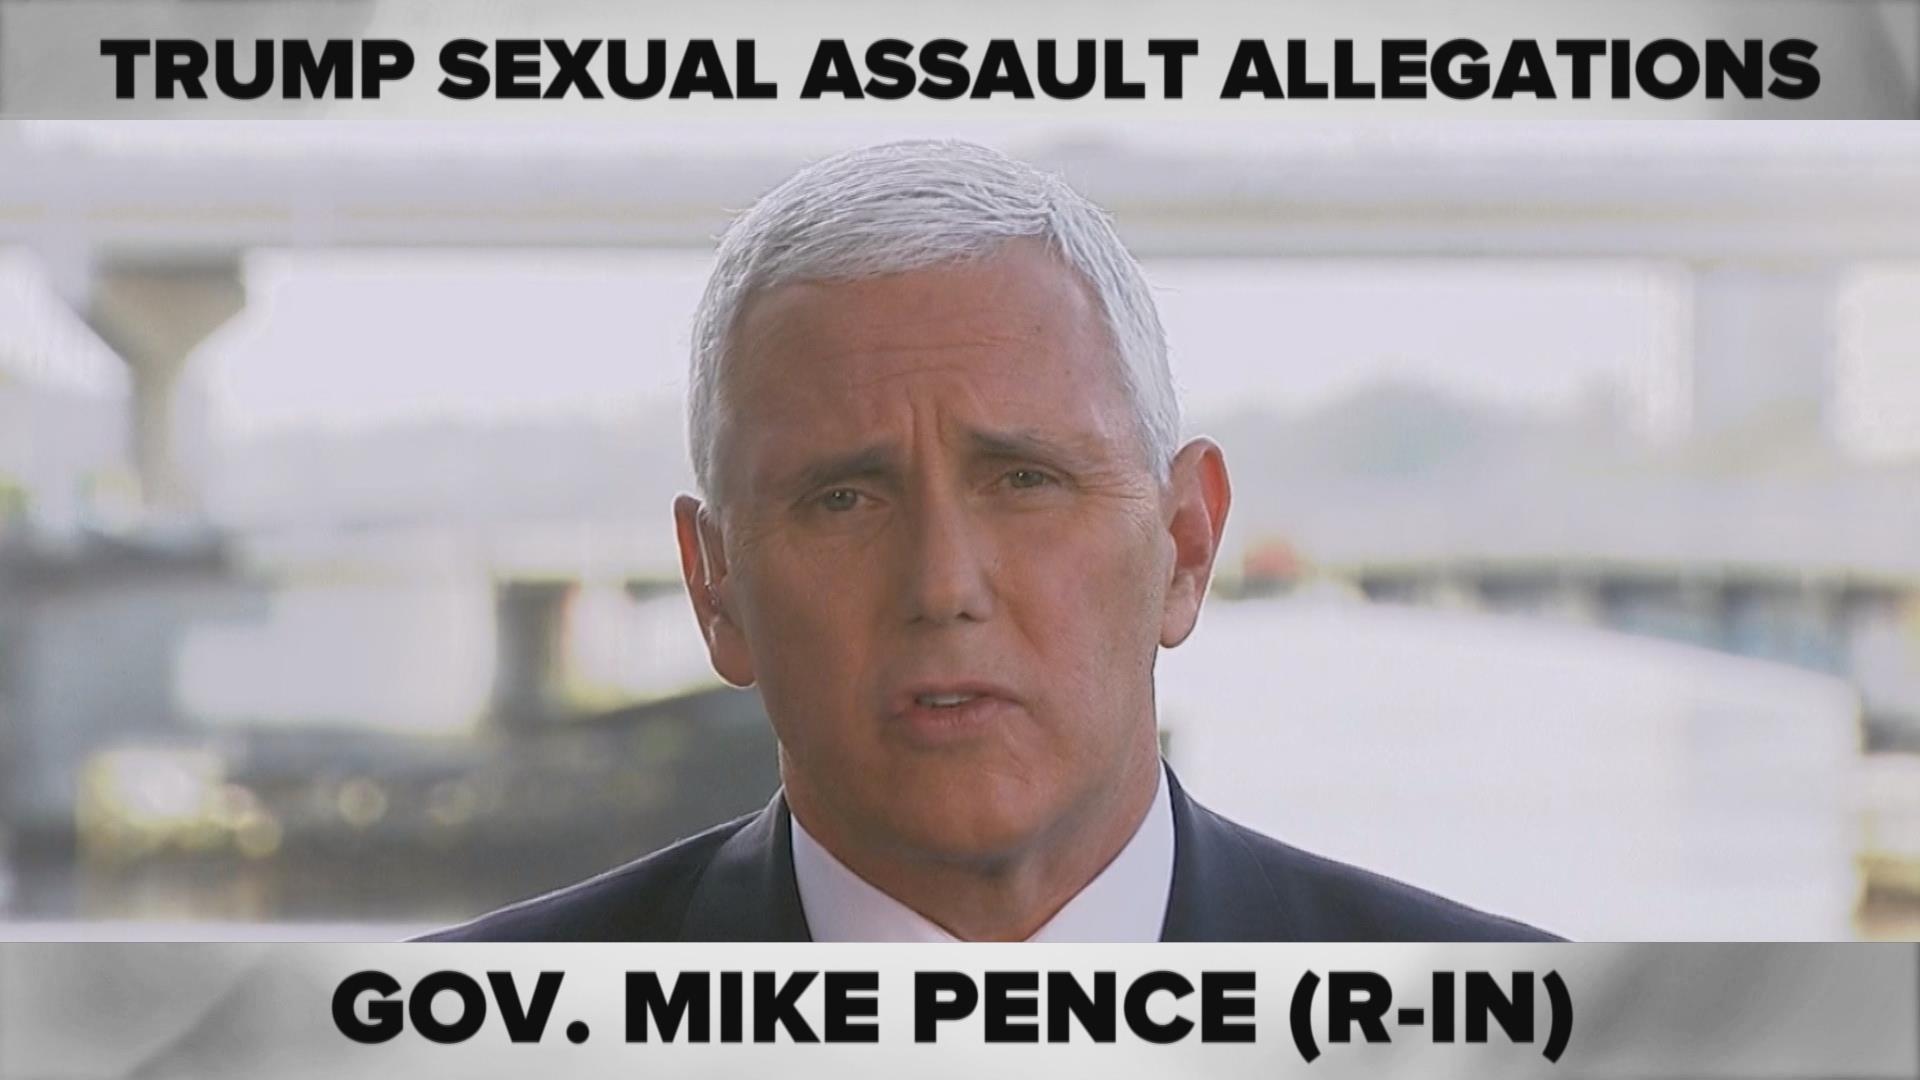 ComPRESSed: Allegations Against Trump 'Unsubstantiated,' Pence Says